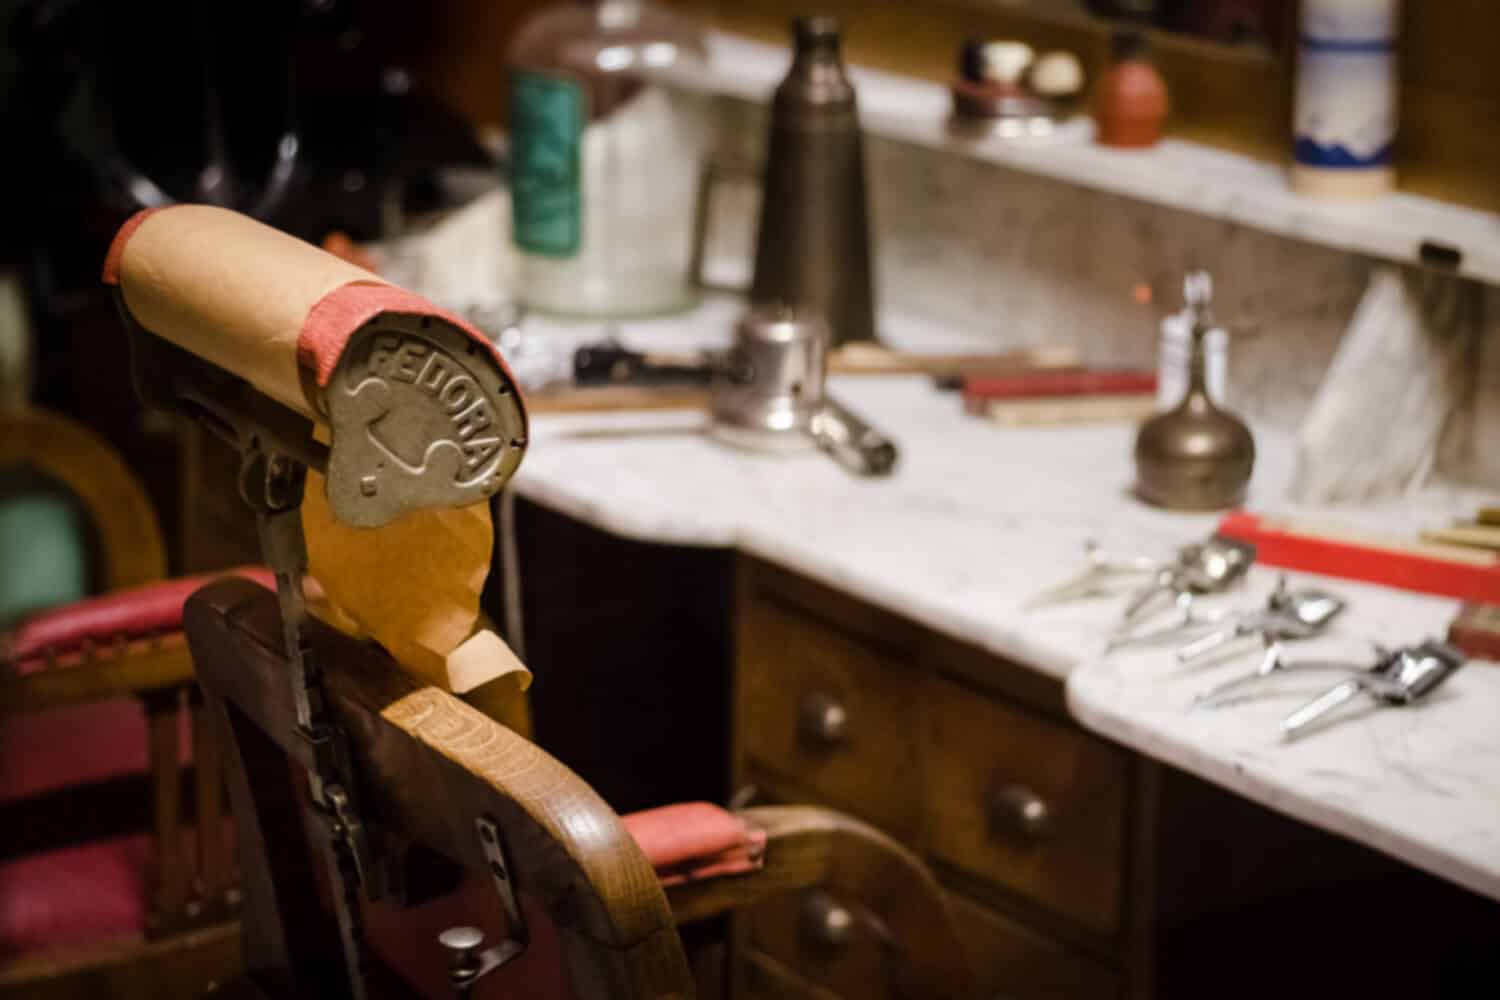 What To Do After The Barber (Or You) Botched Your Beard